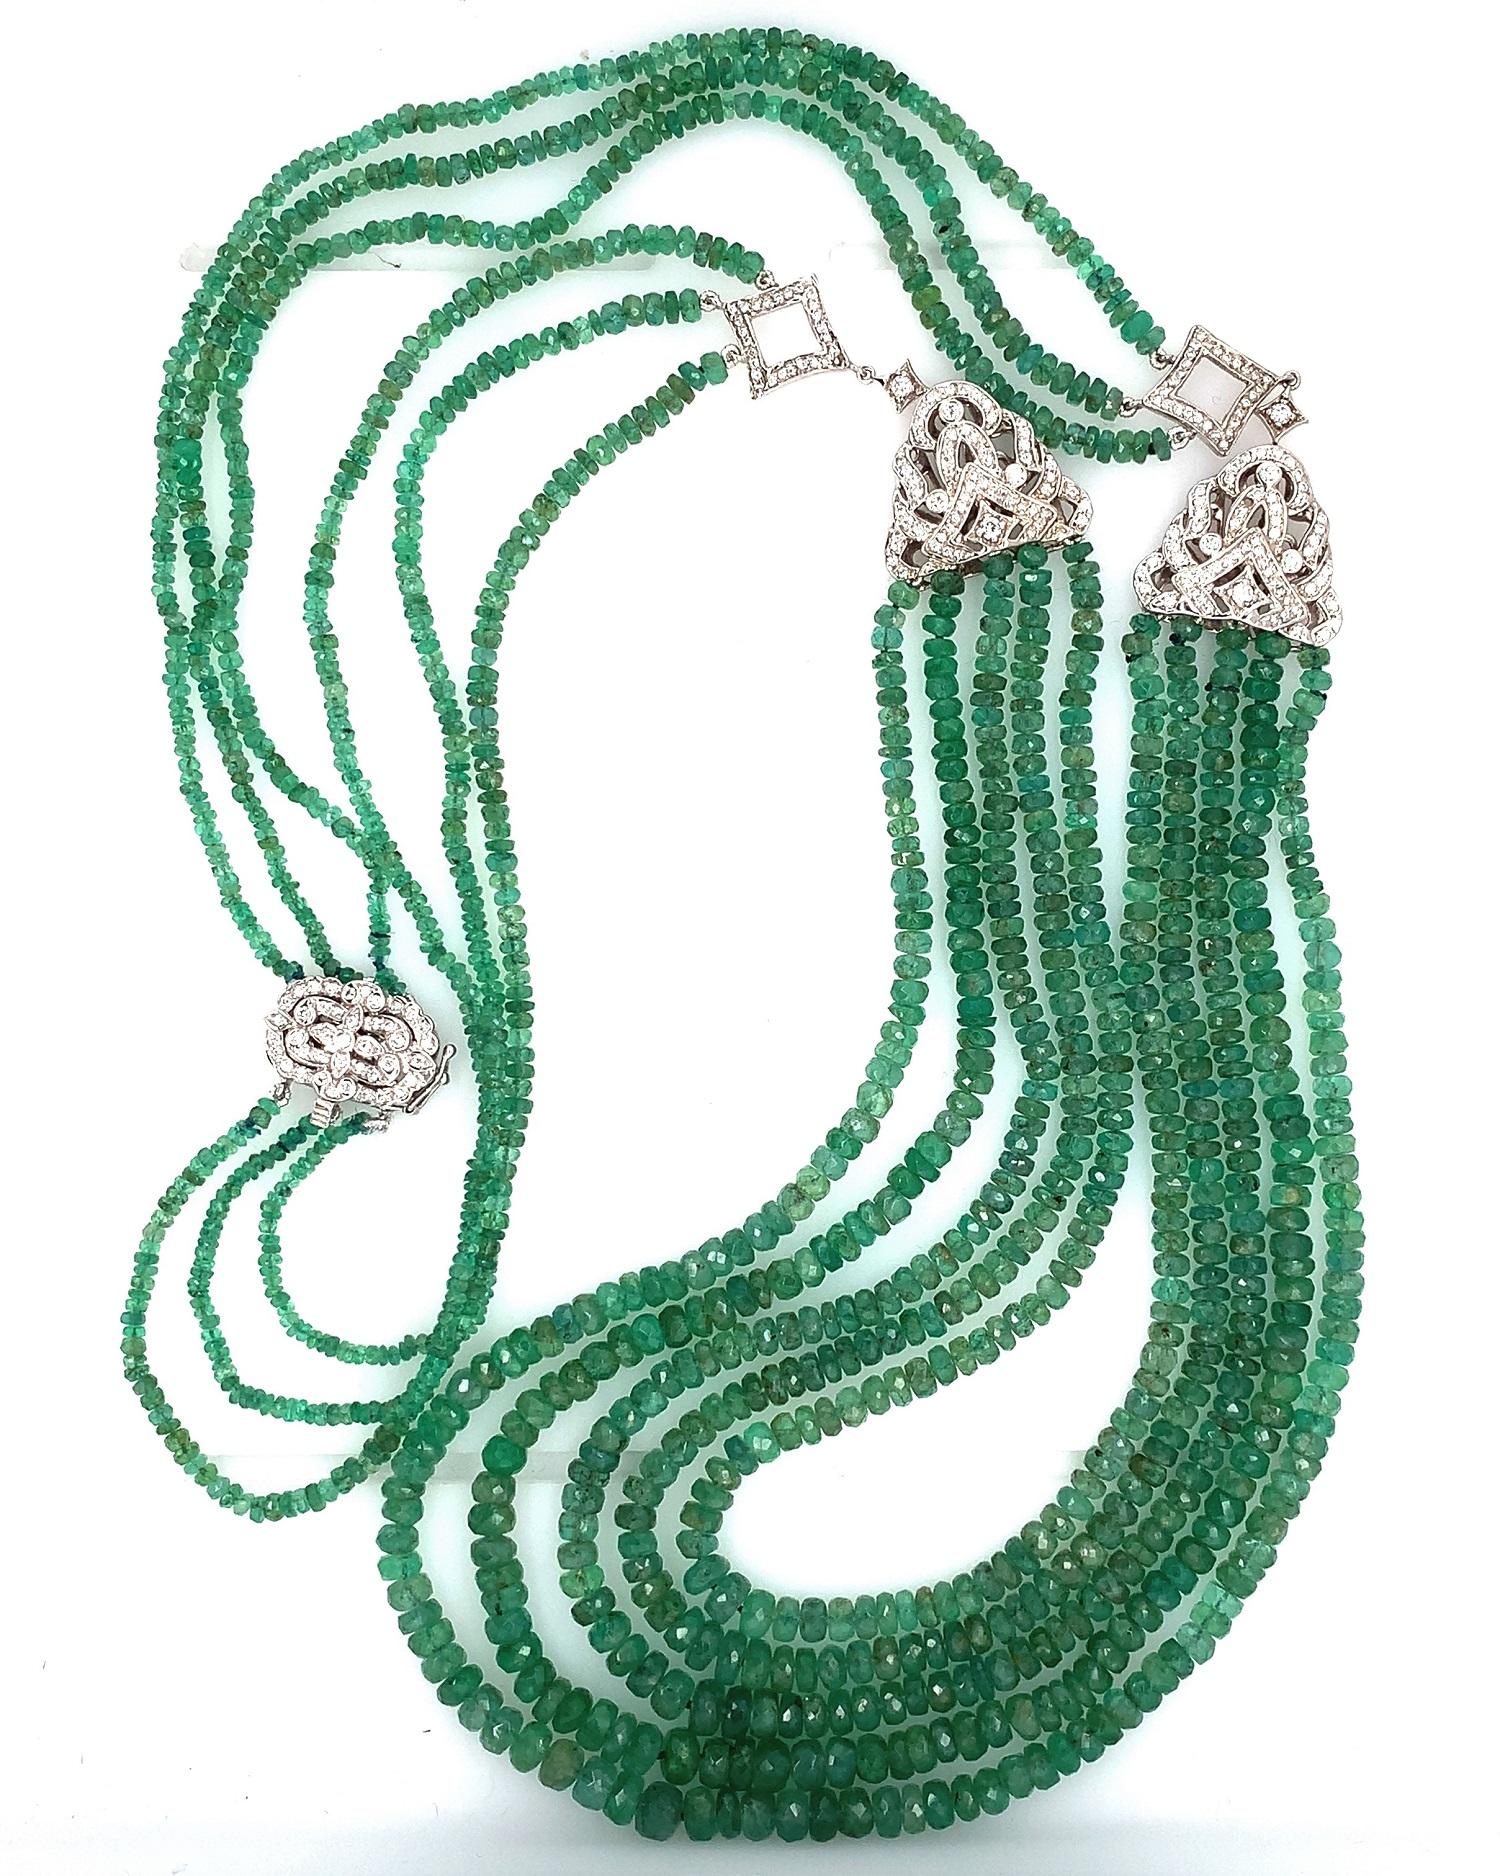 A multi-strand emerald necklace containing 300 carats of green faceted genuine emerald beads accented by 14K white gold and diamonds. It measures 29 1/2